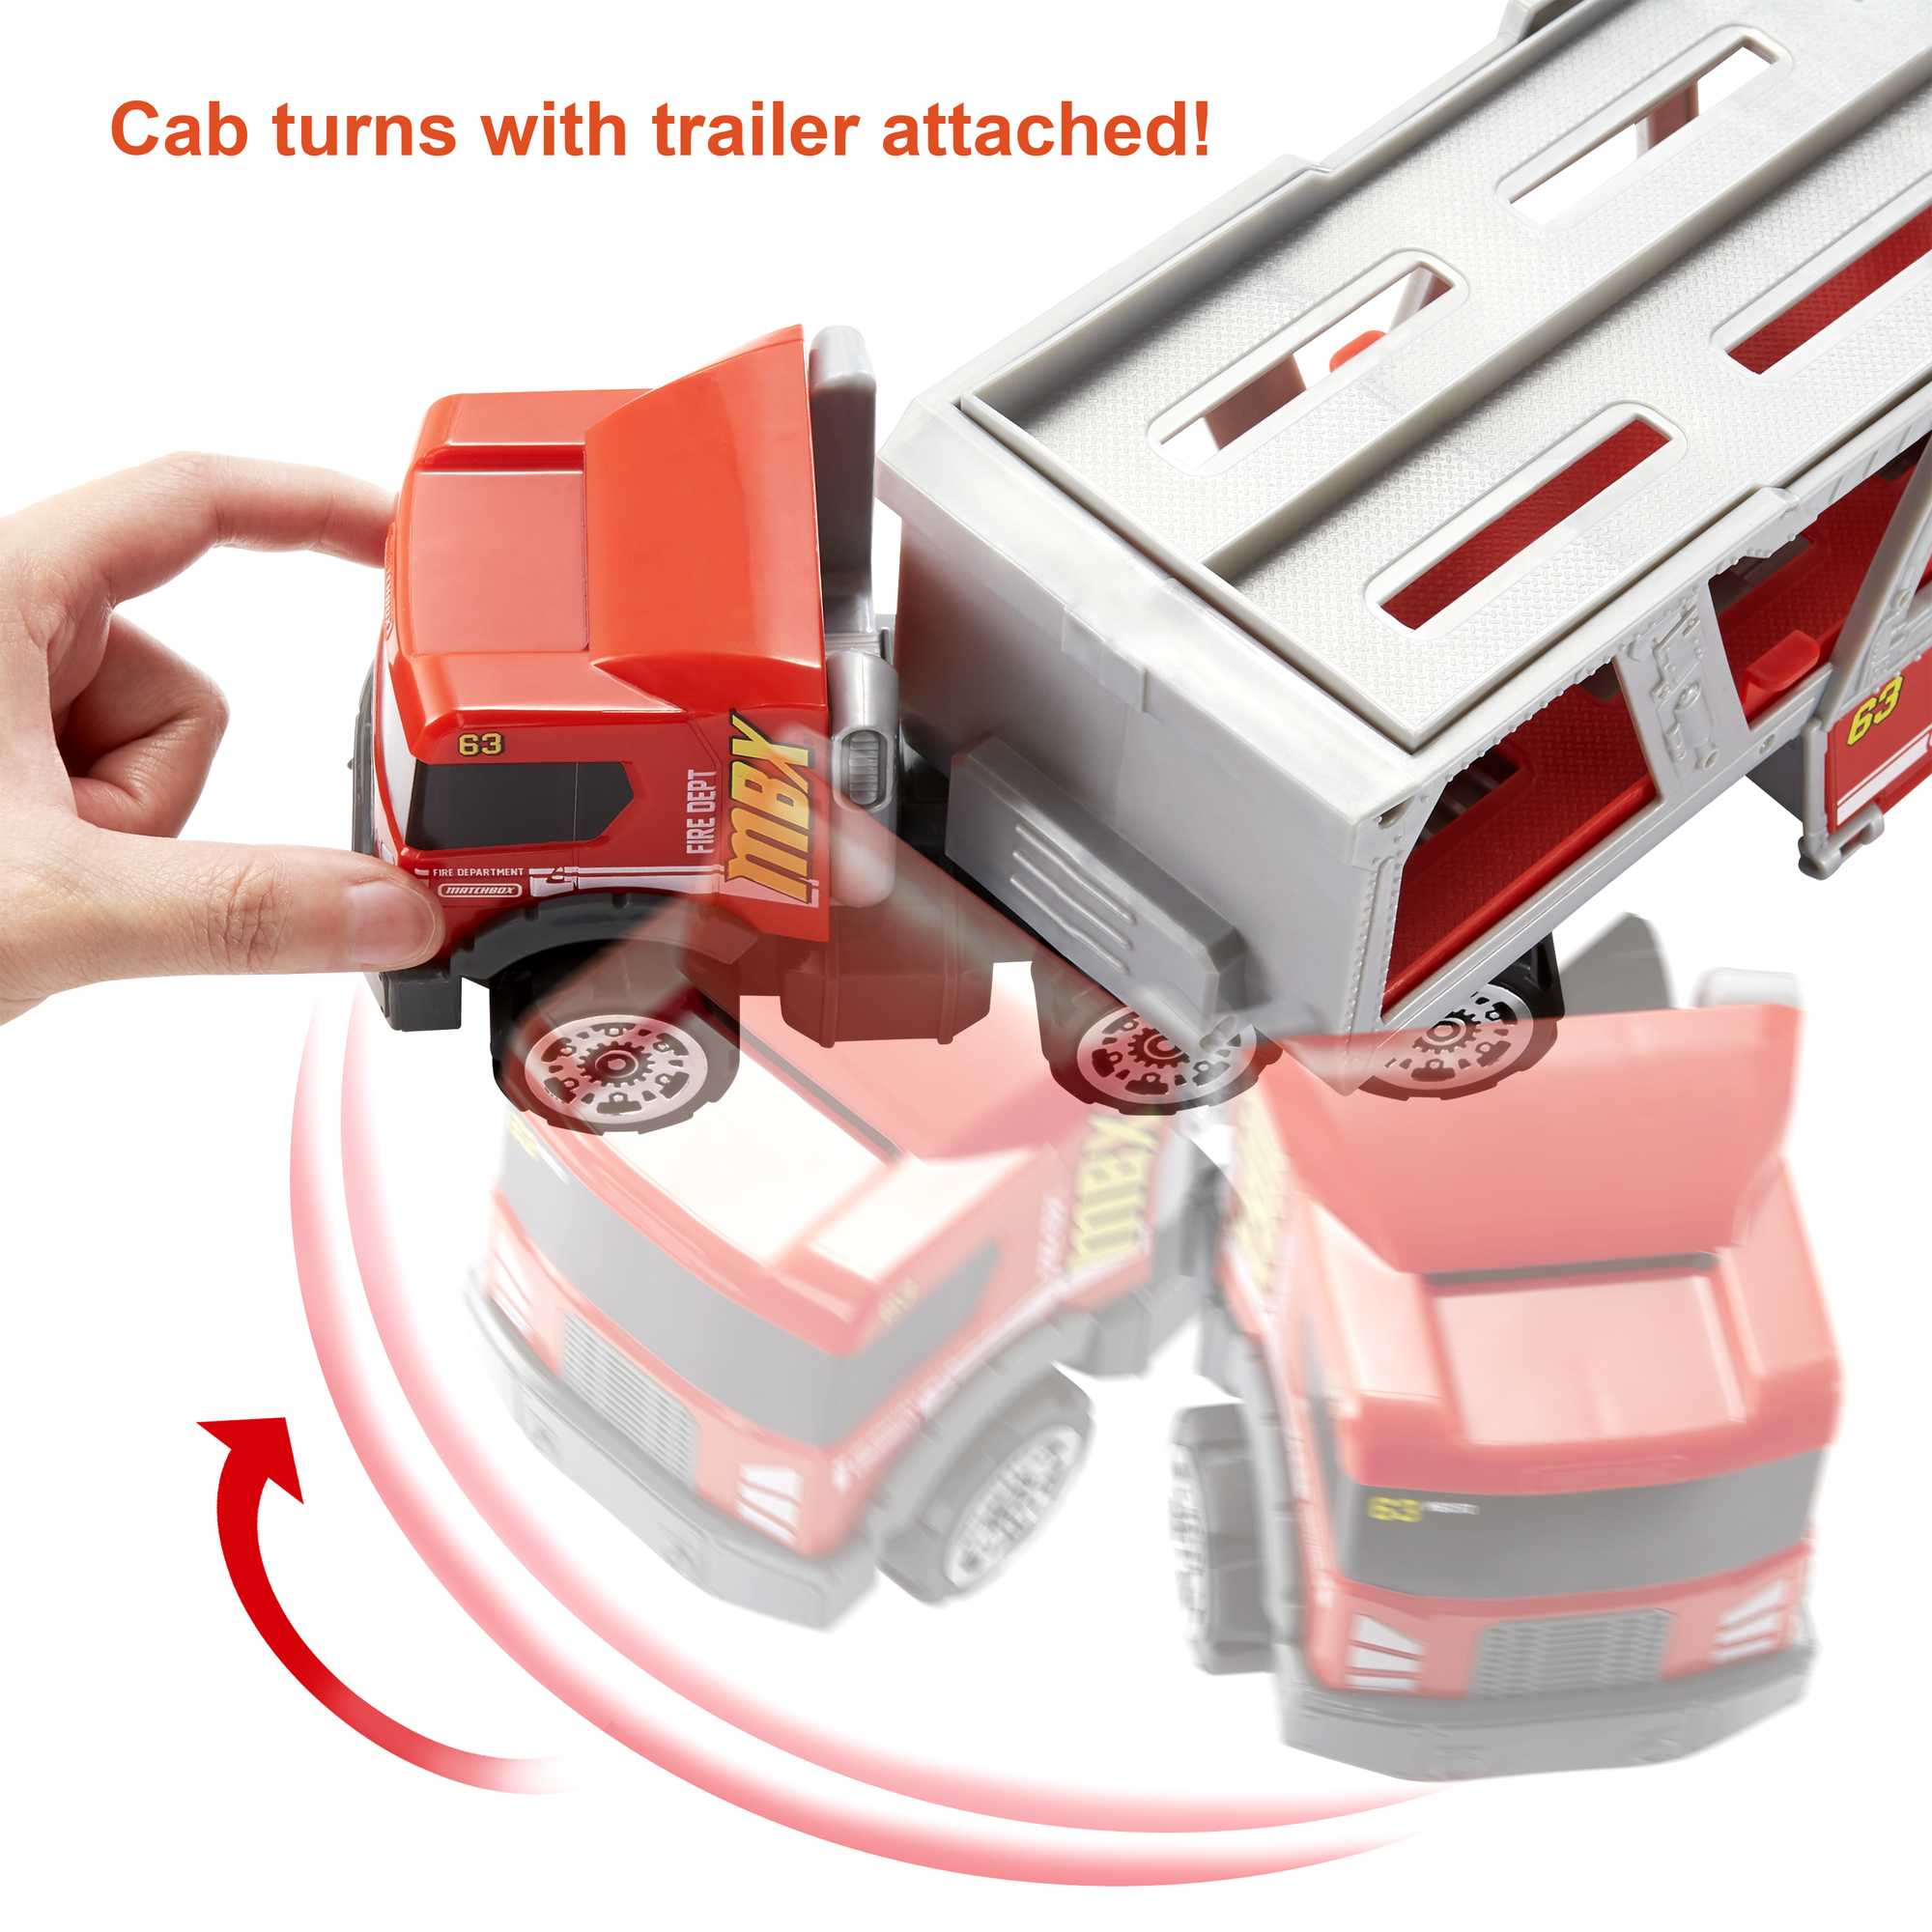 Matchbox Fire Rescue Hauler Playset with Detachable Cab, 1:64 Scale Toy Firetruck & 8 Accessories - image 5 of 10